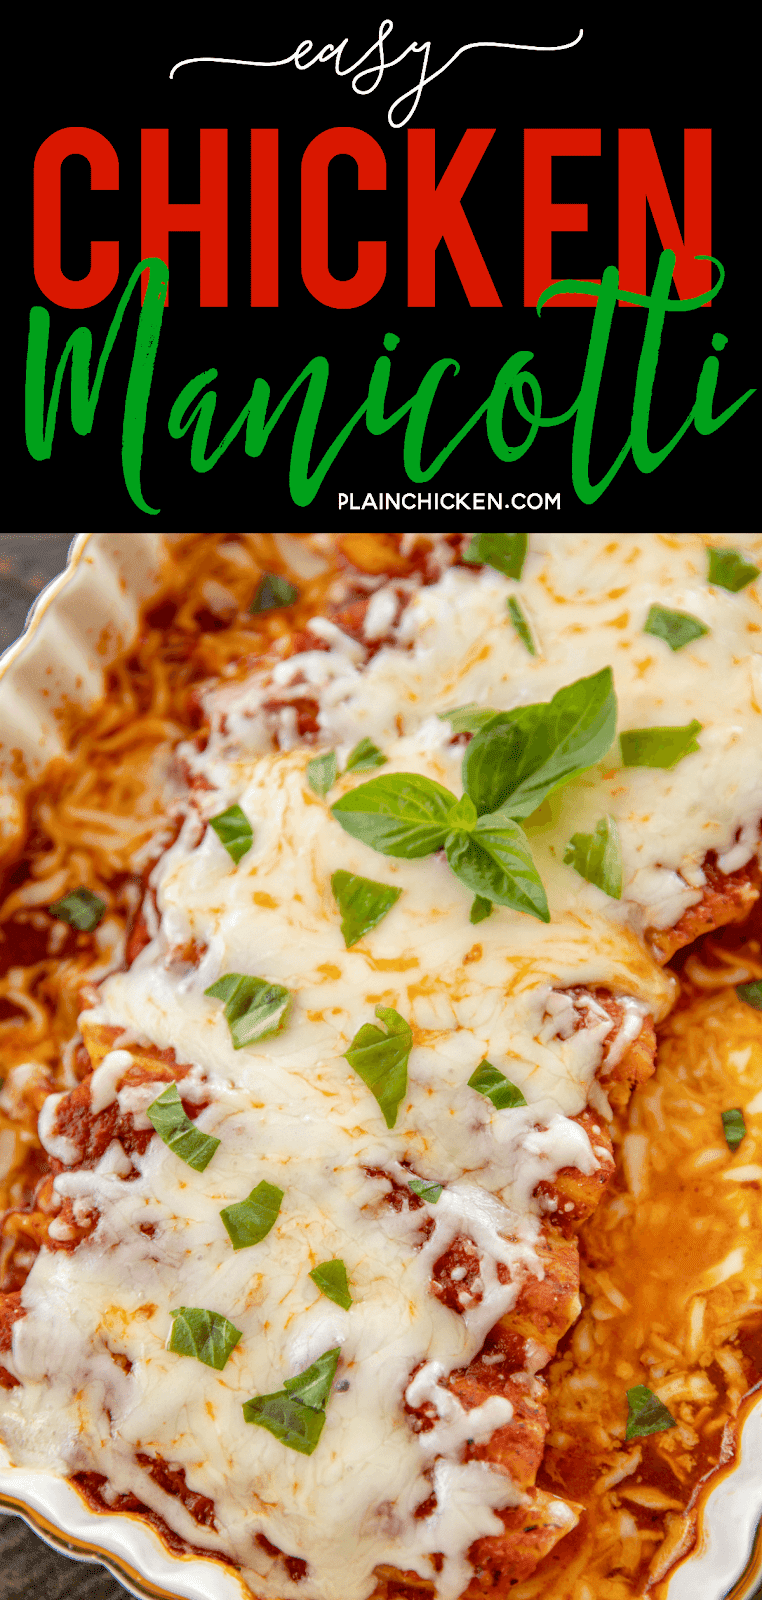 Easy Chicken Manicotti - so easy and seriously delicious! Everyone loved this easy pasta casserole and asked for seconds! YES! Manicotti noodles, chicken tenders, spaghetti sauce, water, garlic, Italian seasoning and mozzarella cheese. No need to boil the noodles or cook the chicken - it all bakes in the casserole dish. A family favorite! #pasta #casserole #manicotti #chickenrecipe